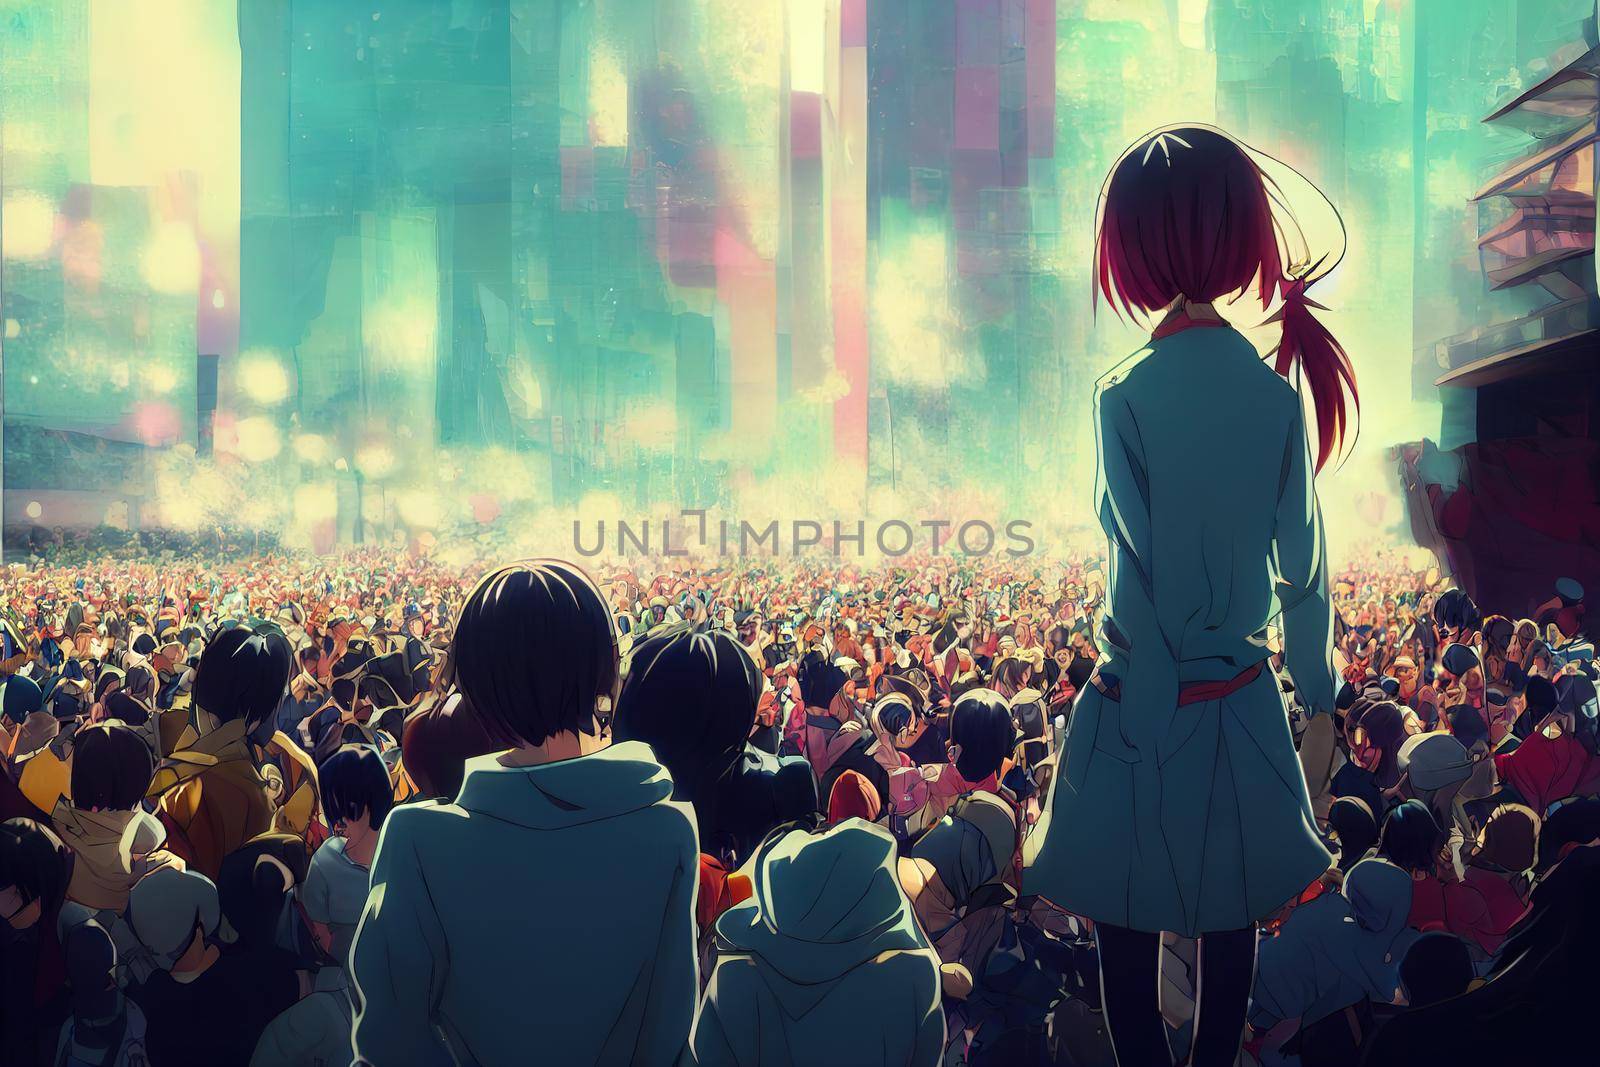 crowds in concert or music festival with a lot of lights, anime style by 2ragon